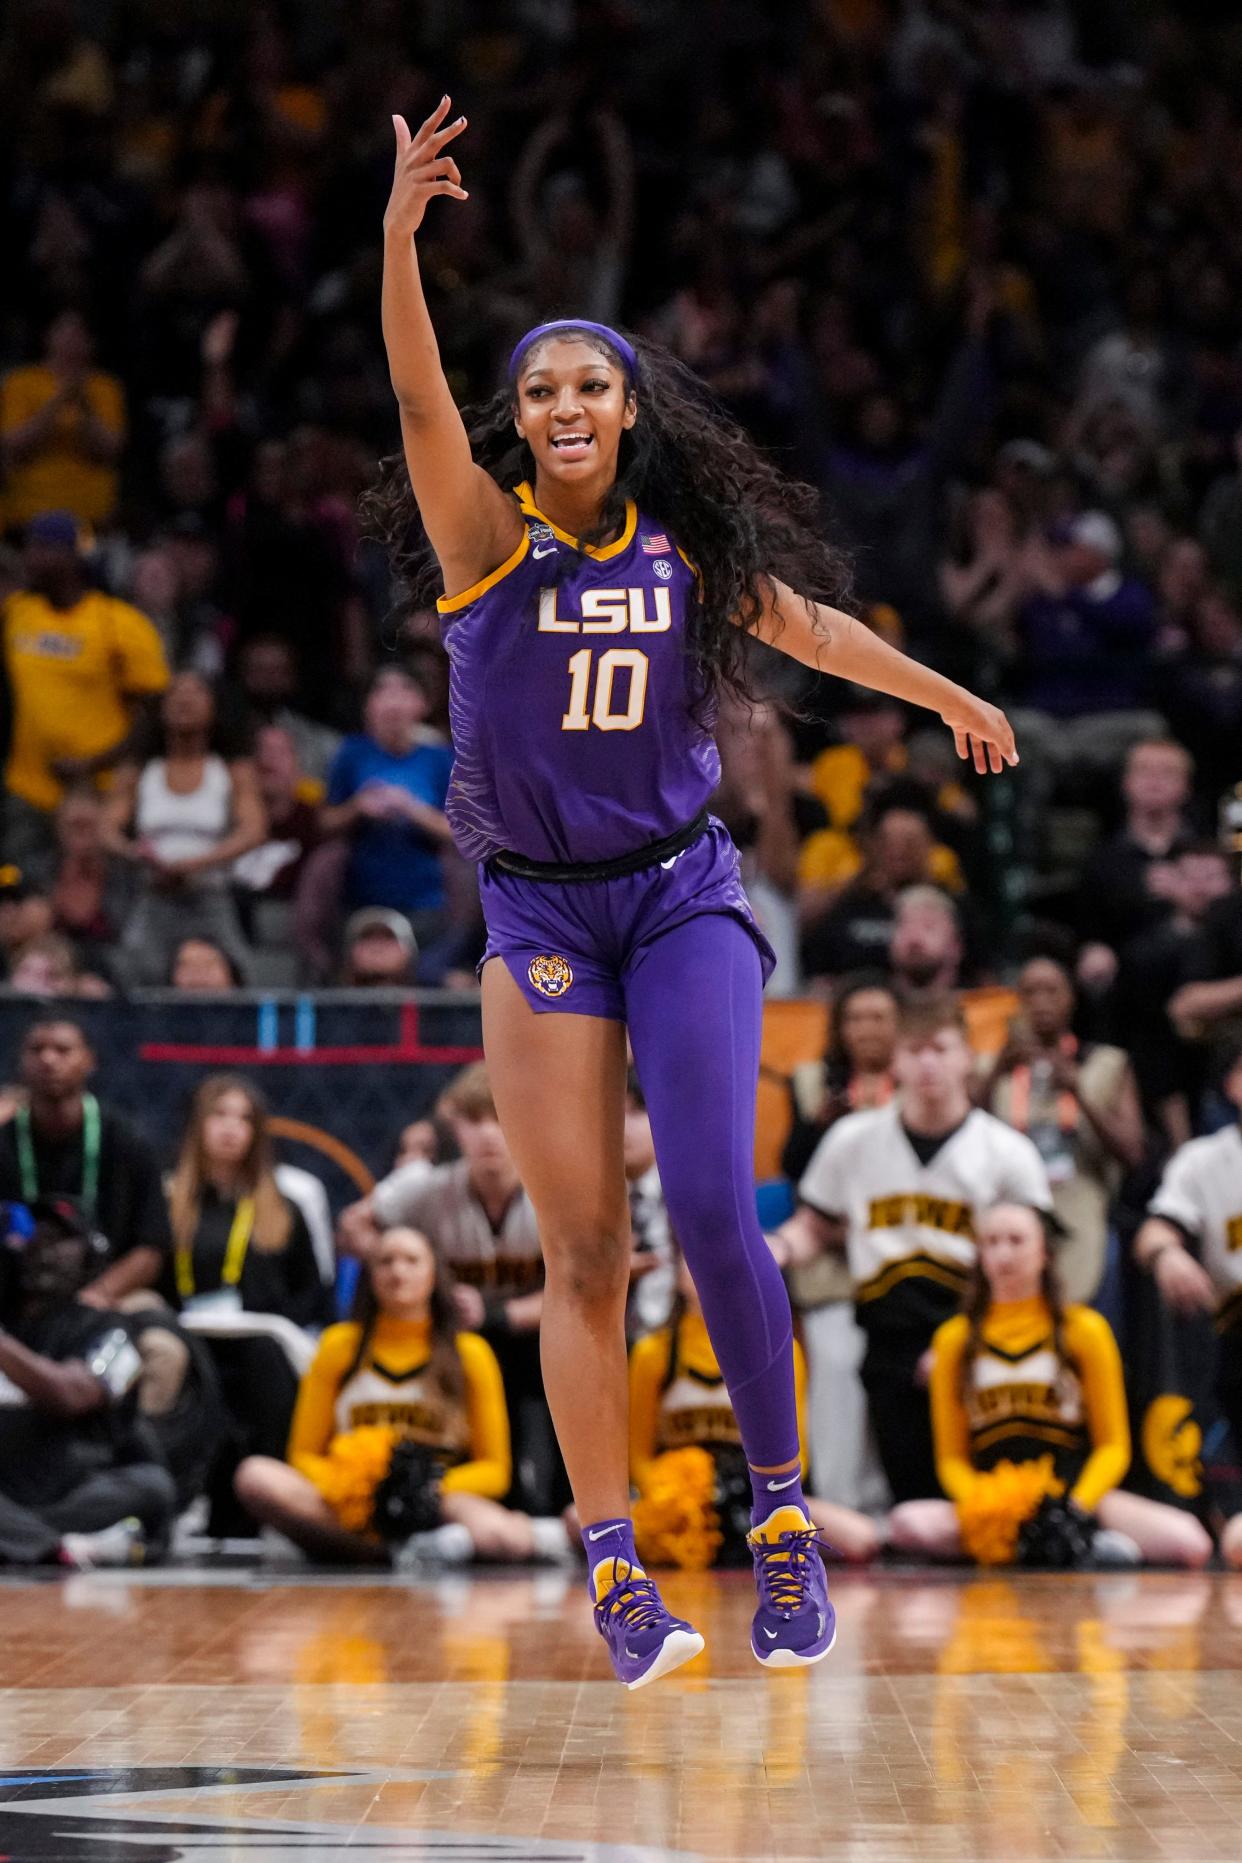 Angel Reese says her mentor and LSU legend Shaquille O'Neal are always reminding her, "I need to be dominating in the sport, but I should have a lot of other stuff. Basketball is second to me.”